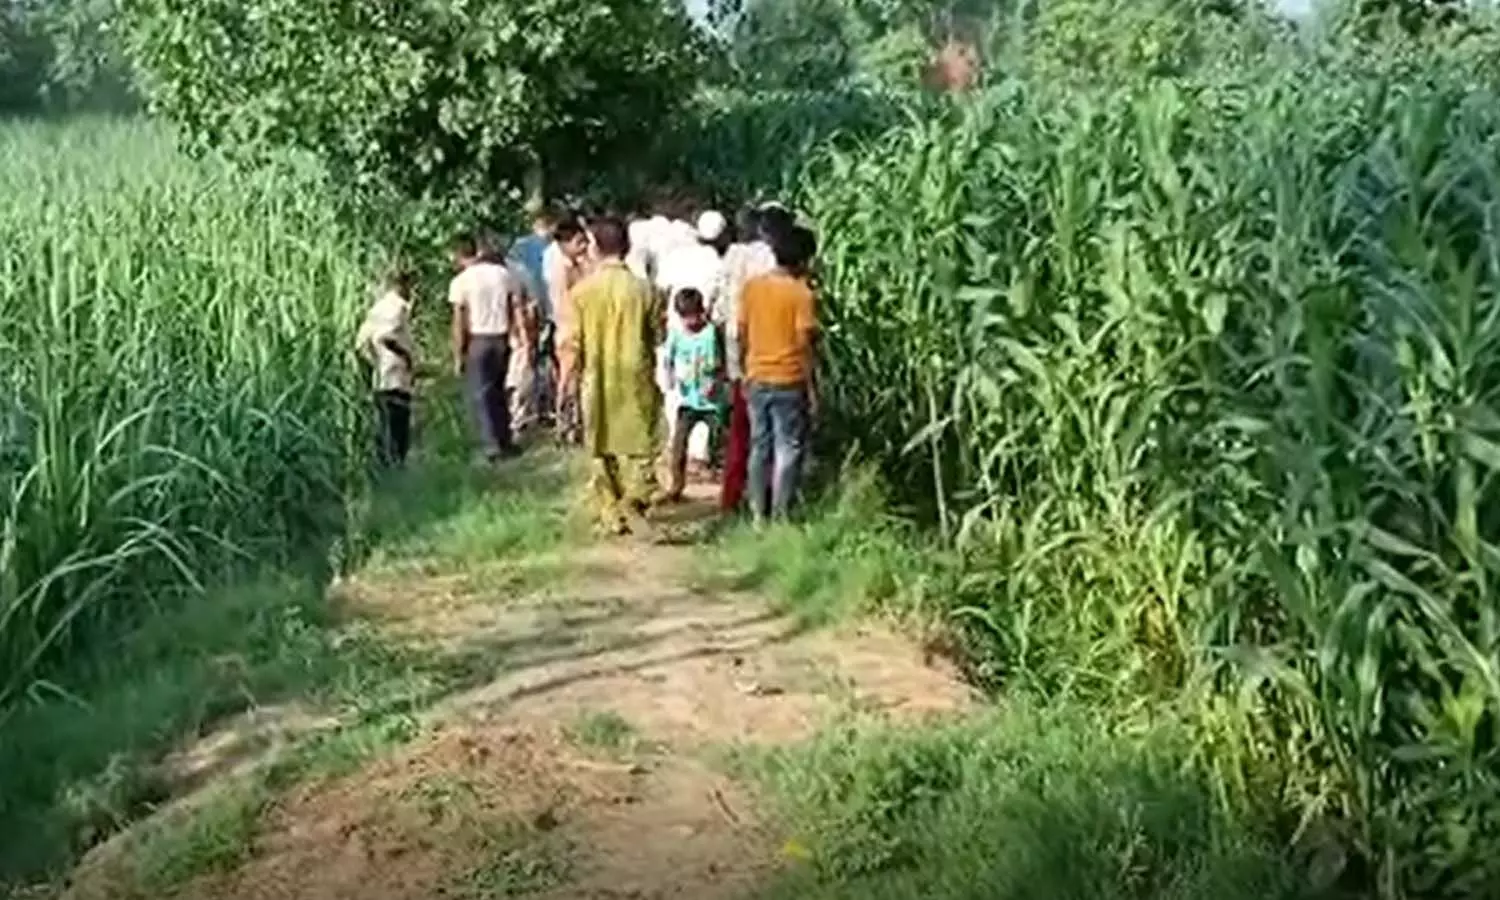 Sensation in the area due to the discovery of Muzaffarnagar dead body, the identity of the deceased could not be established